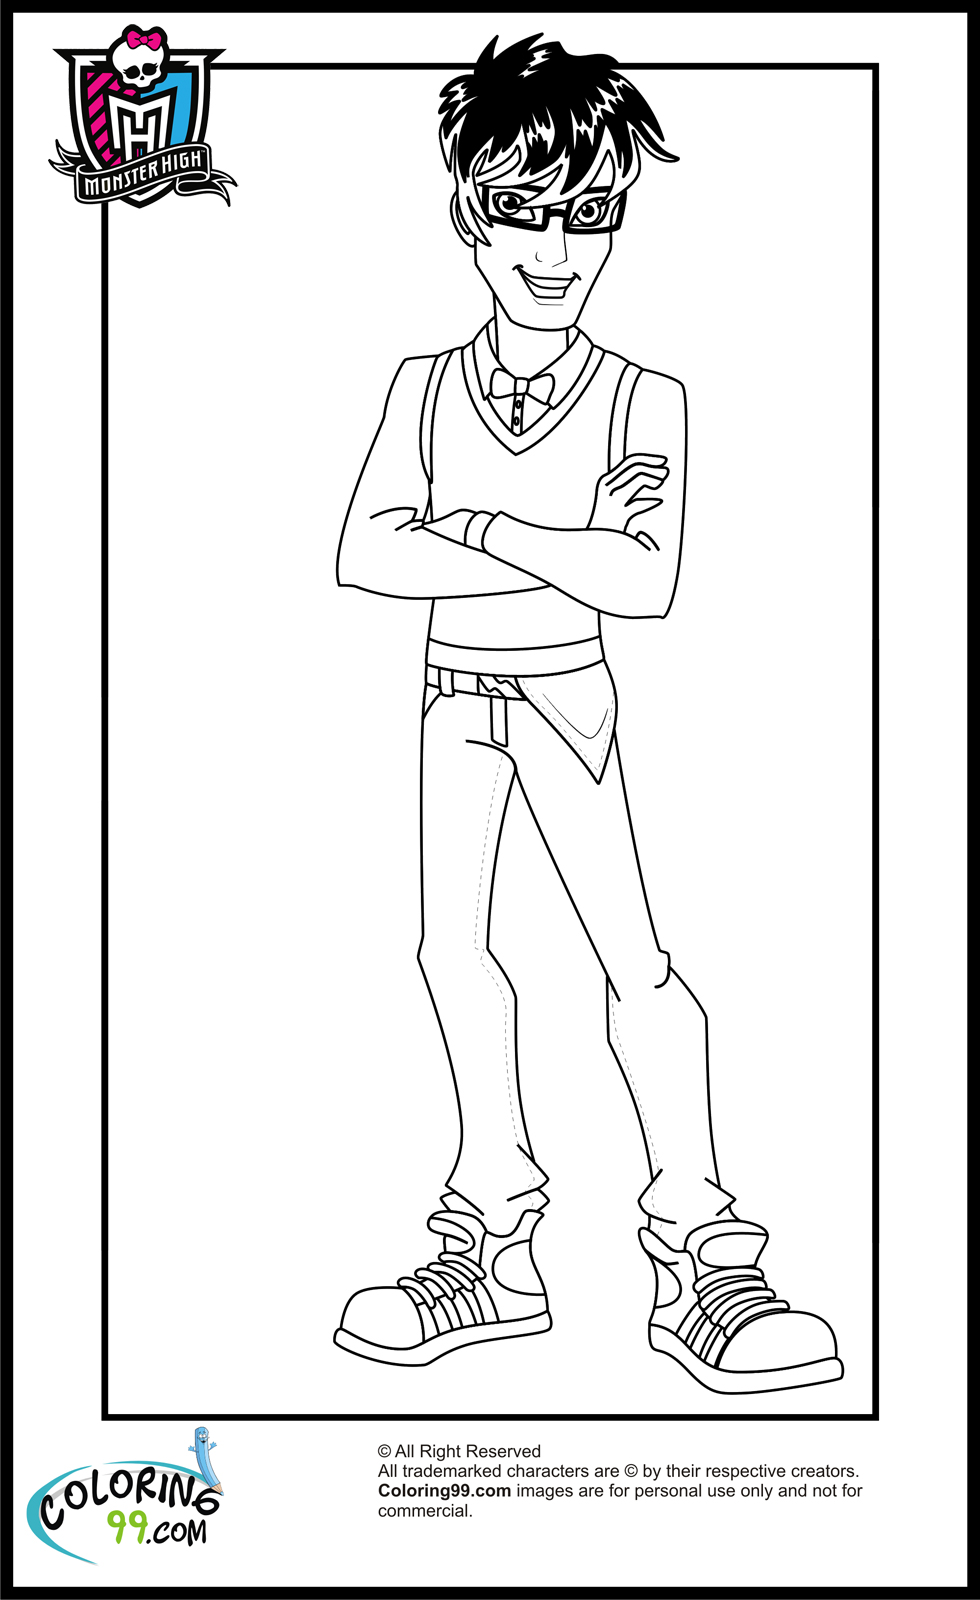 monster high boys jackson jekyll coloring pages